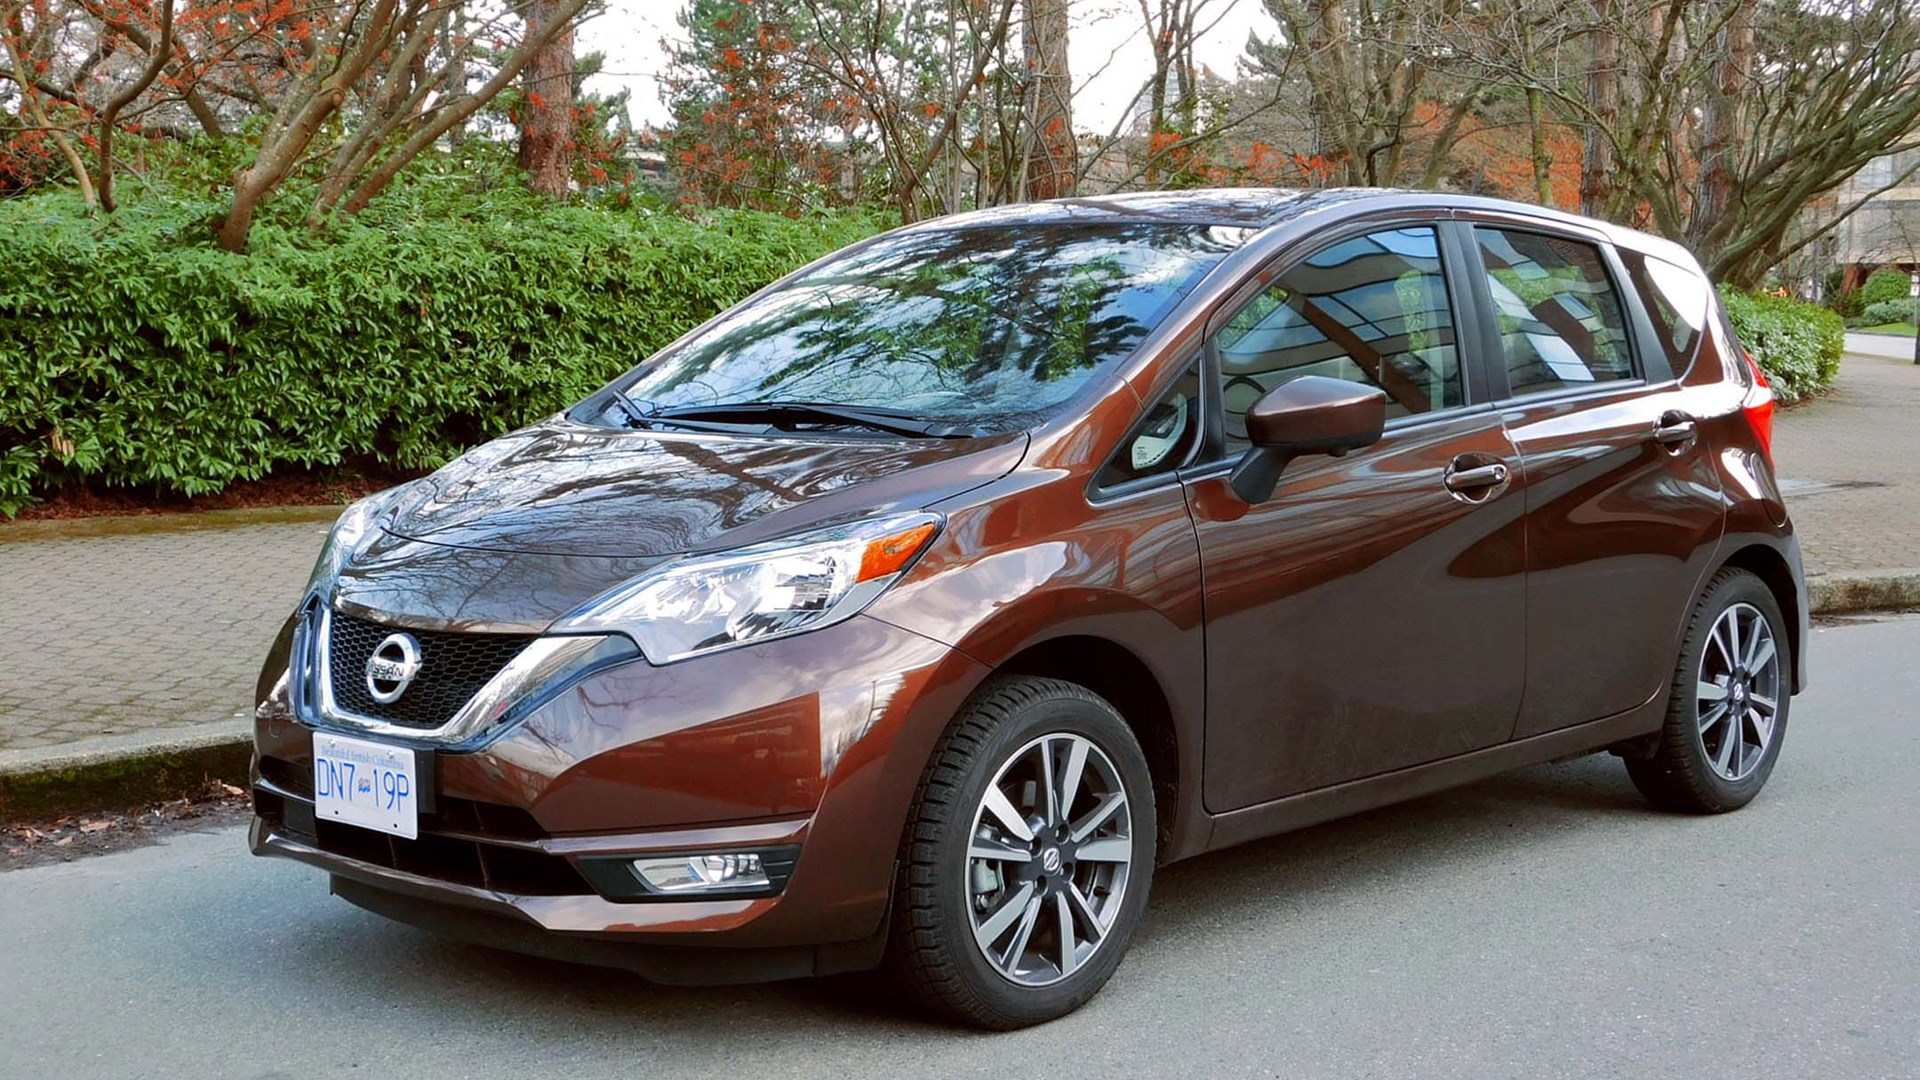 Nissan note 2020. Nissan Note 2017. Ниссан ноут 2017г. Ниссан ноут гибрид 2021.